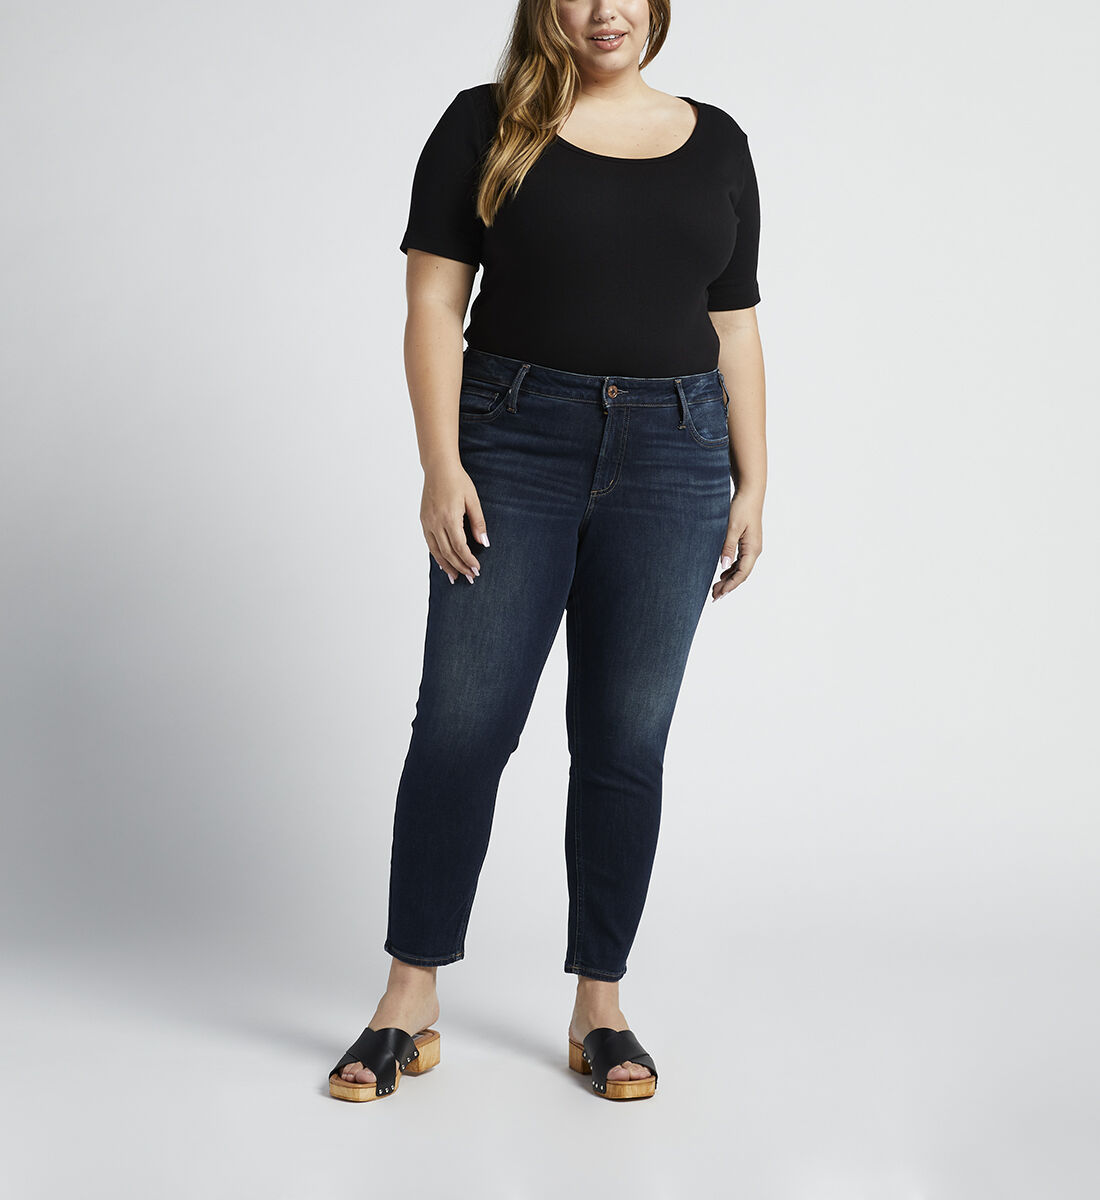 Elyse Mid Rise Skinny Crop Jeans Plus Size Front